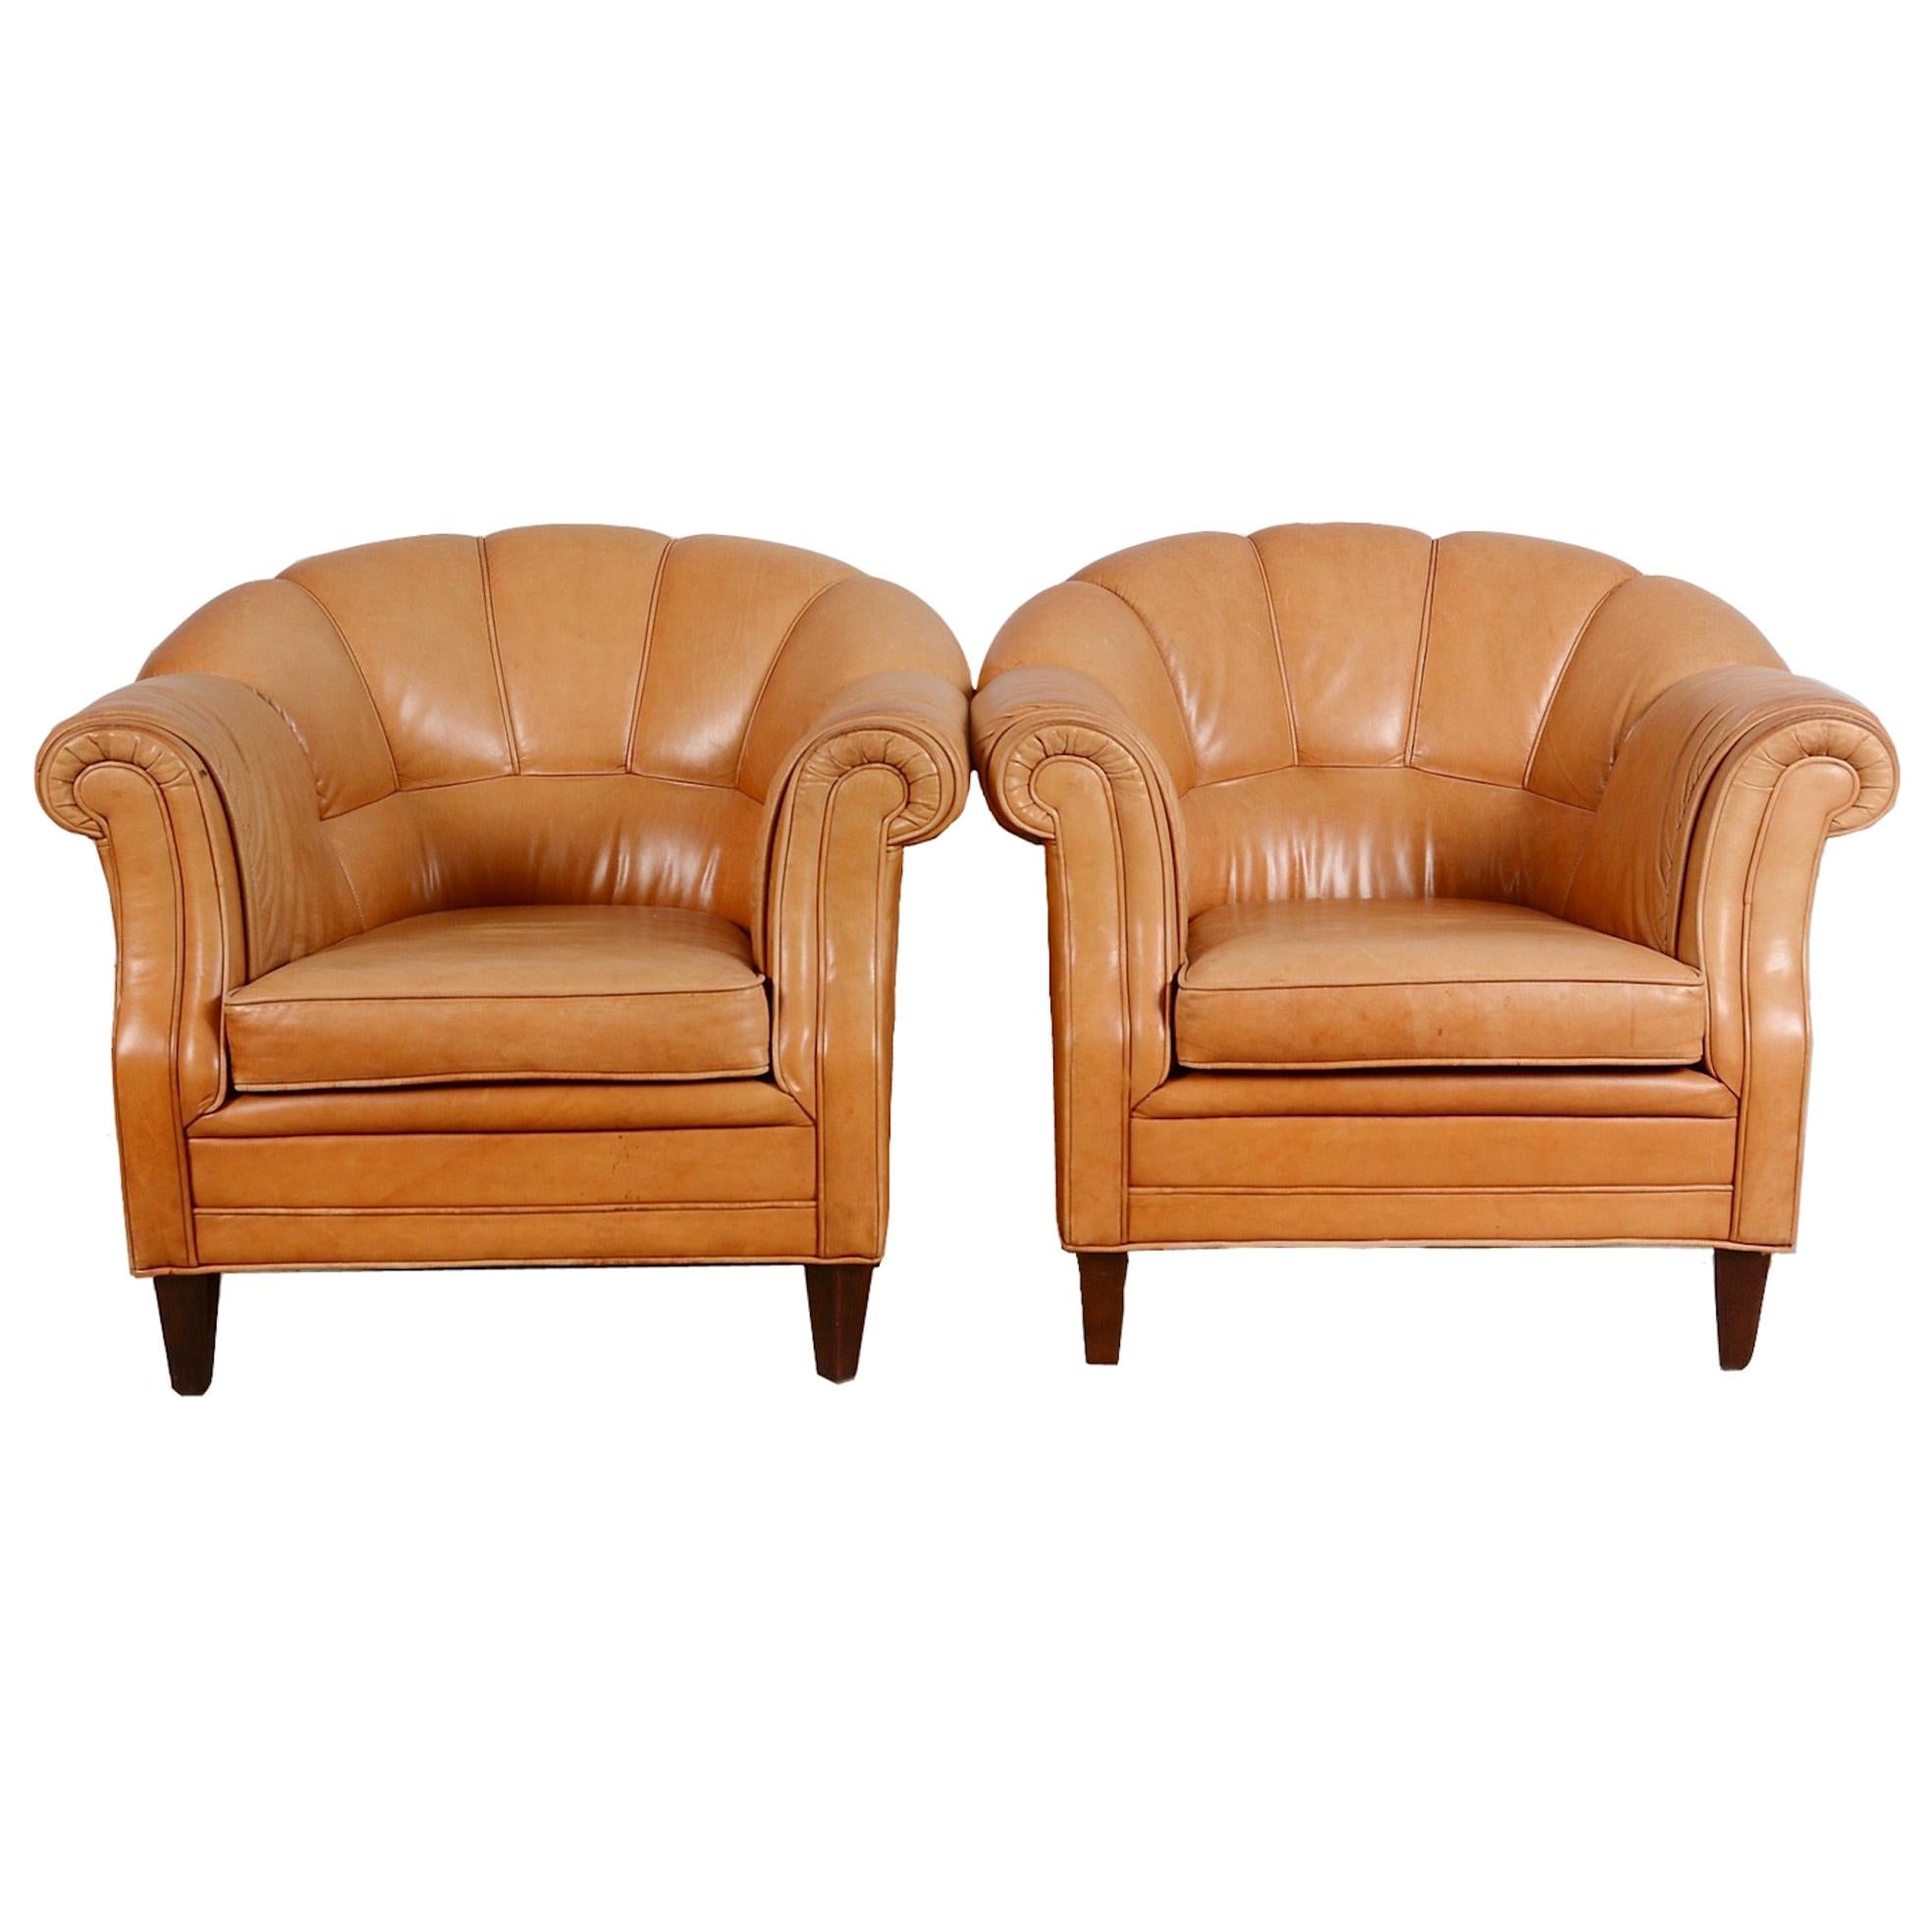 Pair of Leather Club Chairs D425